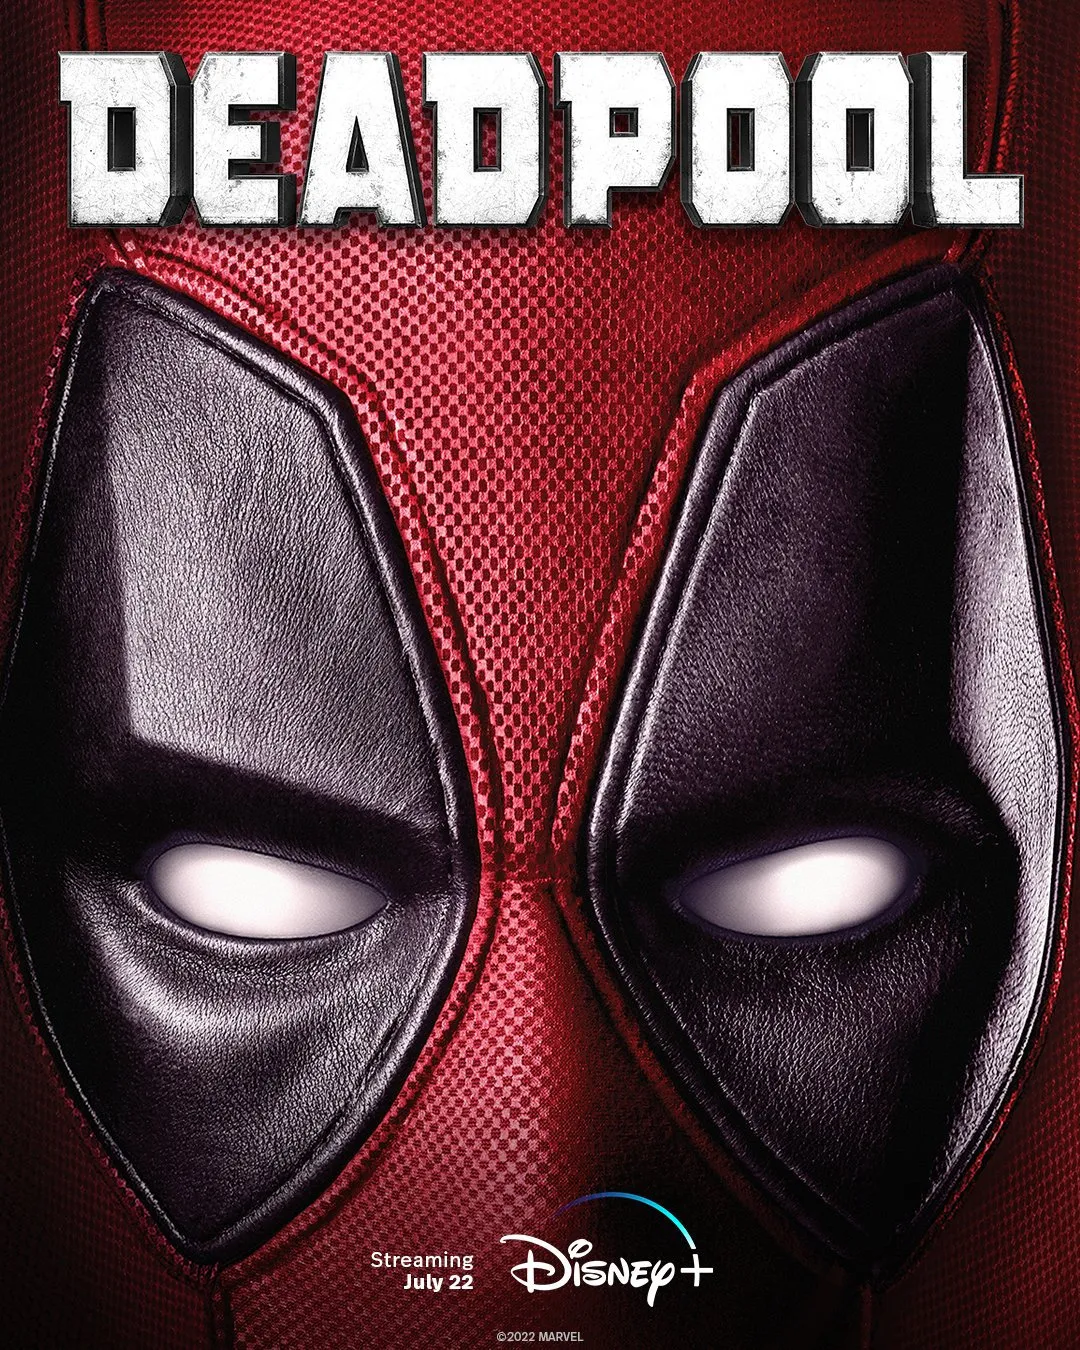 Disney+ Announces 3 R-Rated Marvel Movies 'Deadpool', 'Deadpool 2' and 'Logan' to Launch Today | FMV6